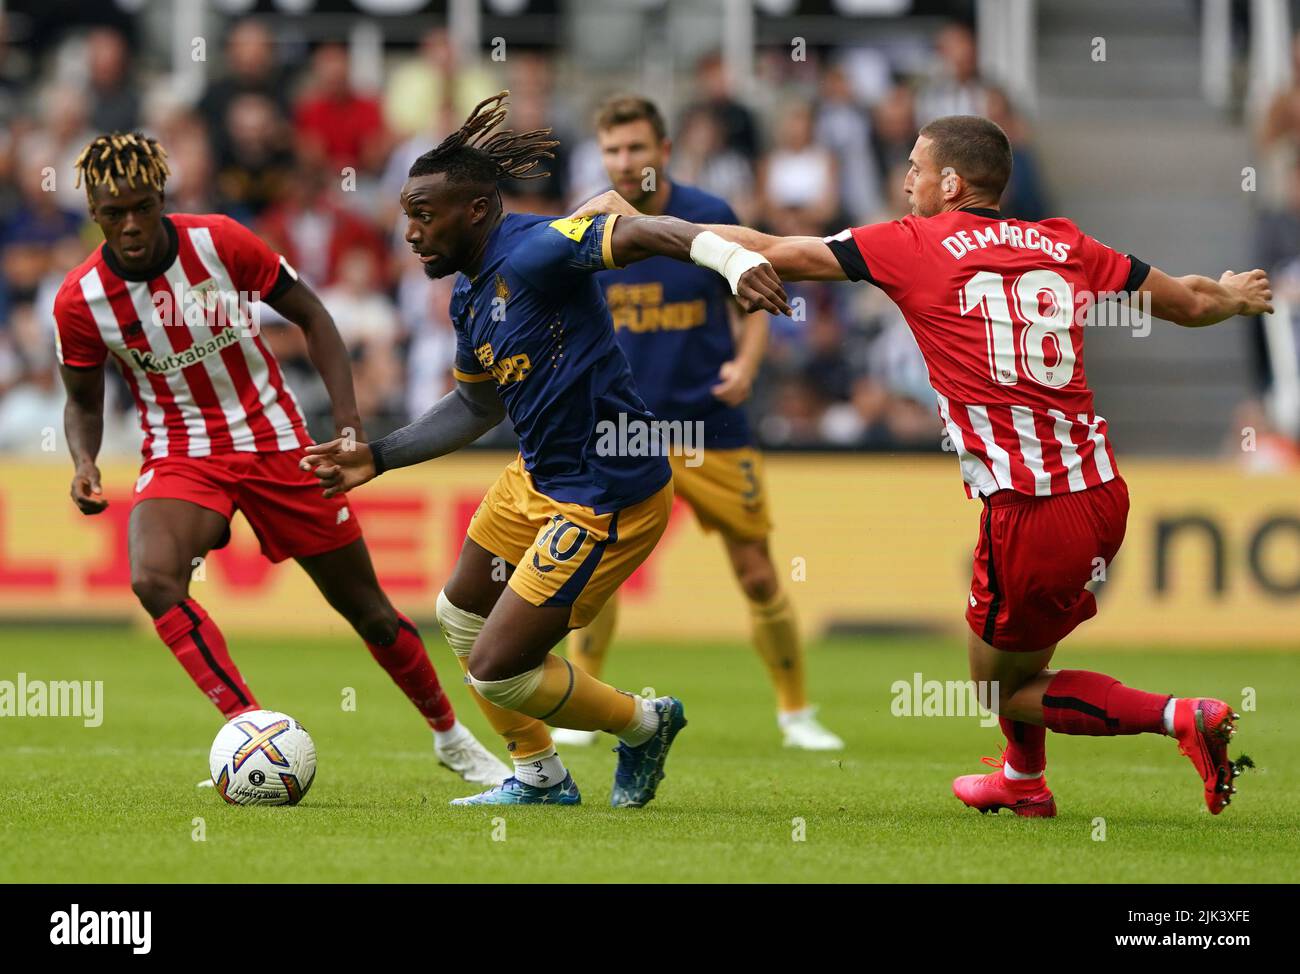 Newcastle's Allan Saint-Maximin with Bilbaoe's Oscar De Marcos (right) and Nico Willimas (left) as they battle for the ball during the pre-season friendly match at St. James' Park, Newcastle upon Tyne. Picture date: Saturday July 30, 2022. Stock Photo